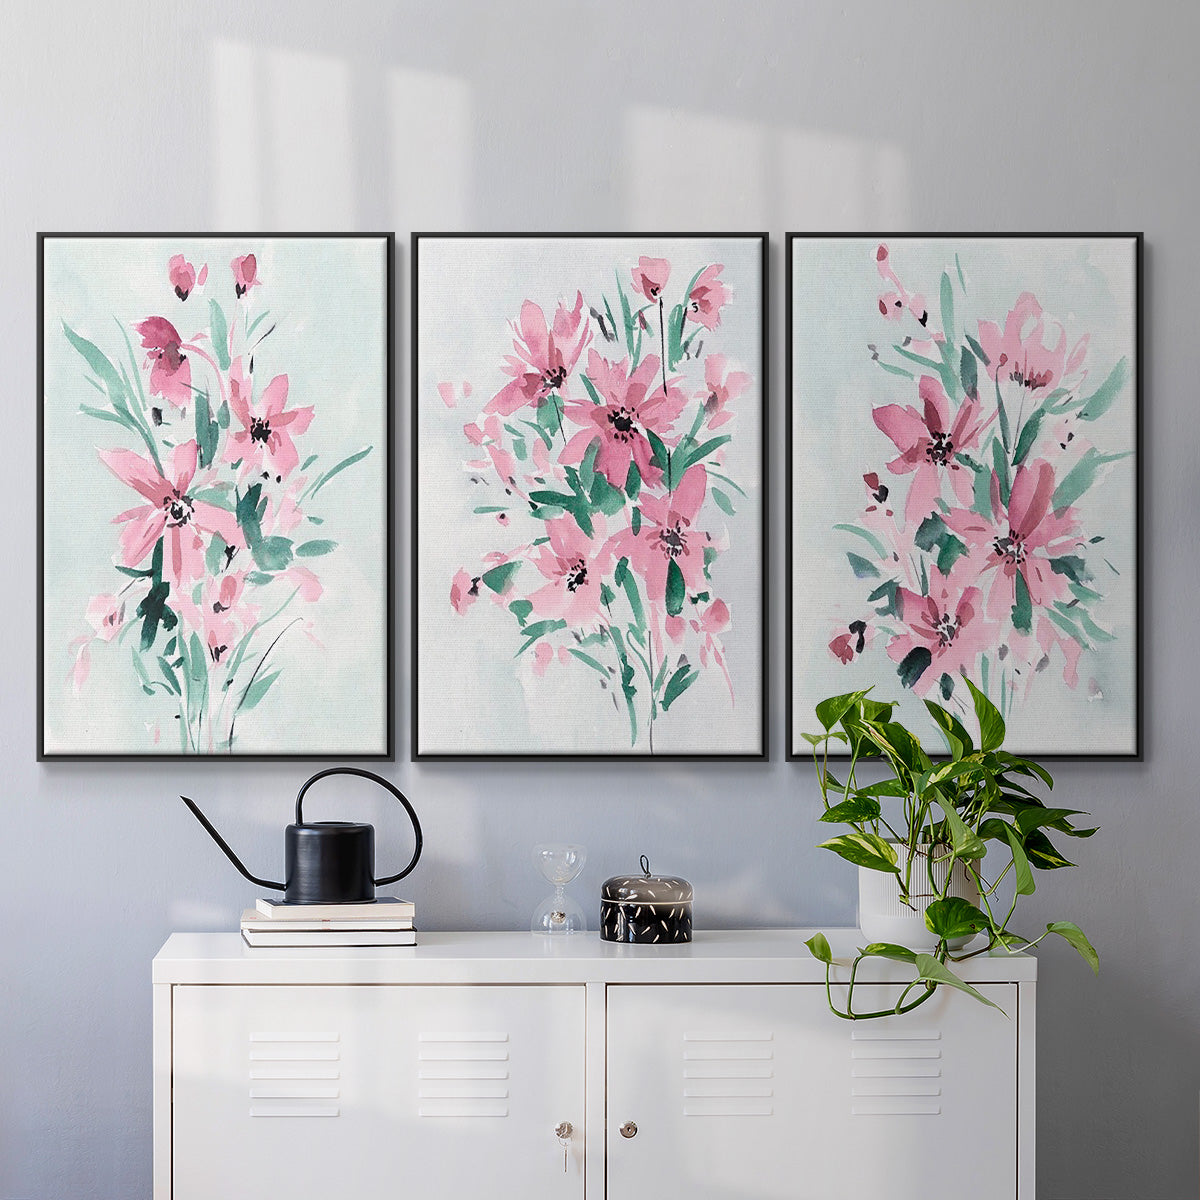 Posy Blooms I - Framed Premium Gallery Wrapped Canvas L Frame 3 Piece Set - Ready to Hang